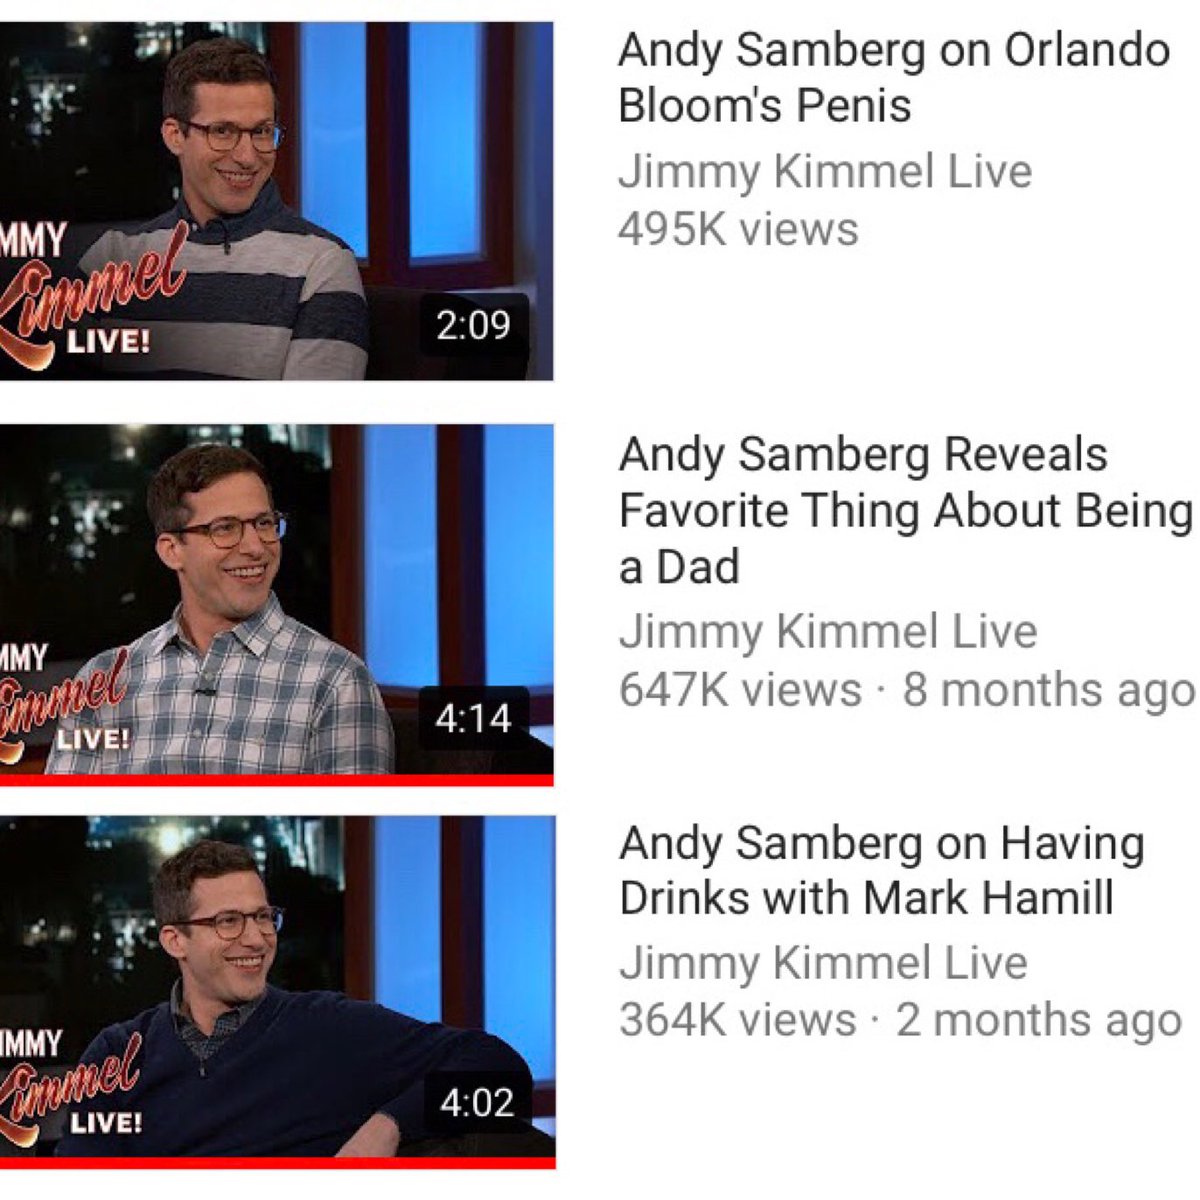 Why Is Every Thumbnail With Andy Samberg The Exact Samepic.twitter.com/NqWQ...